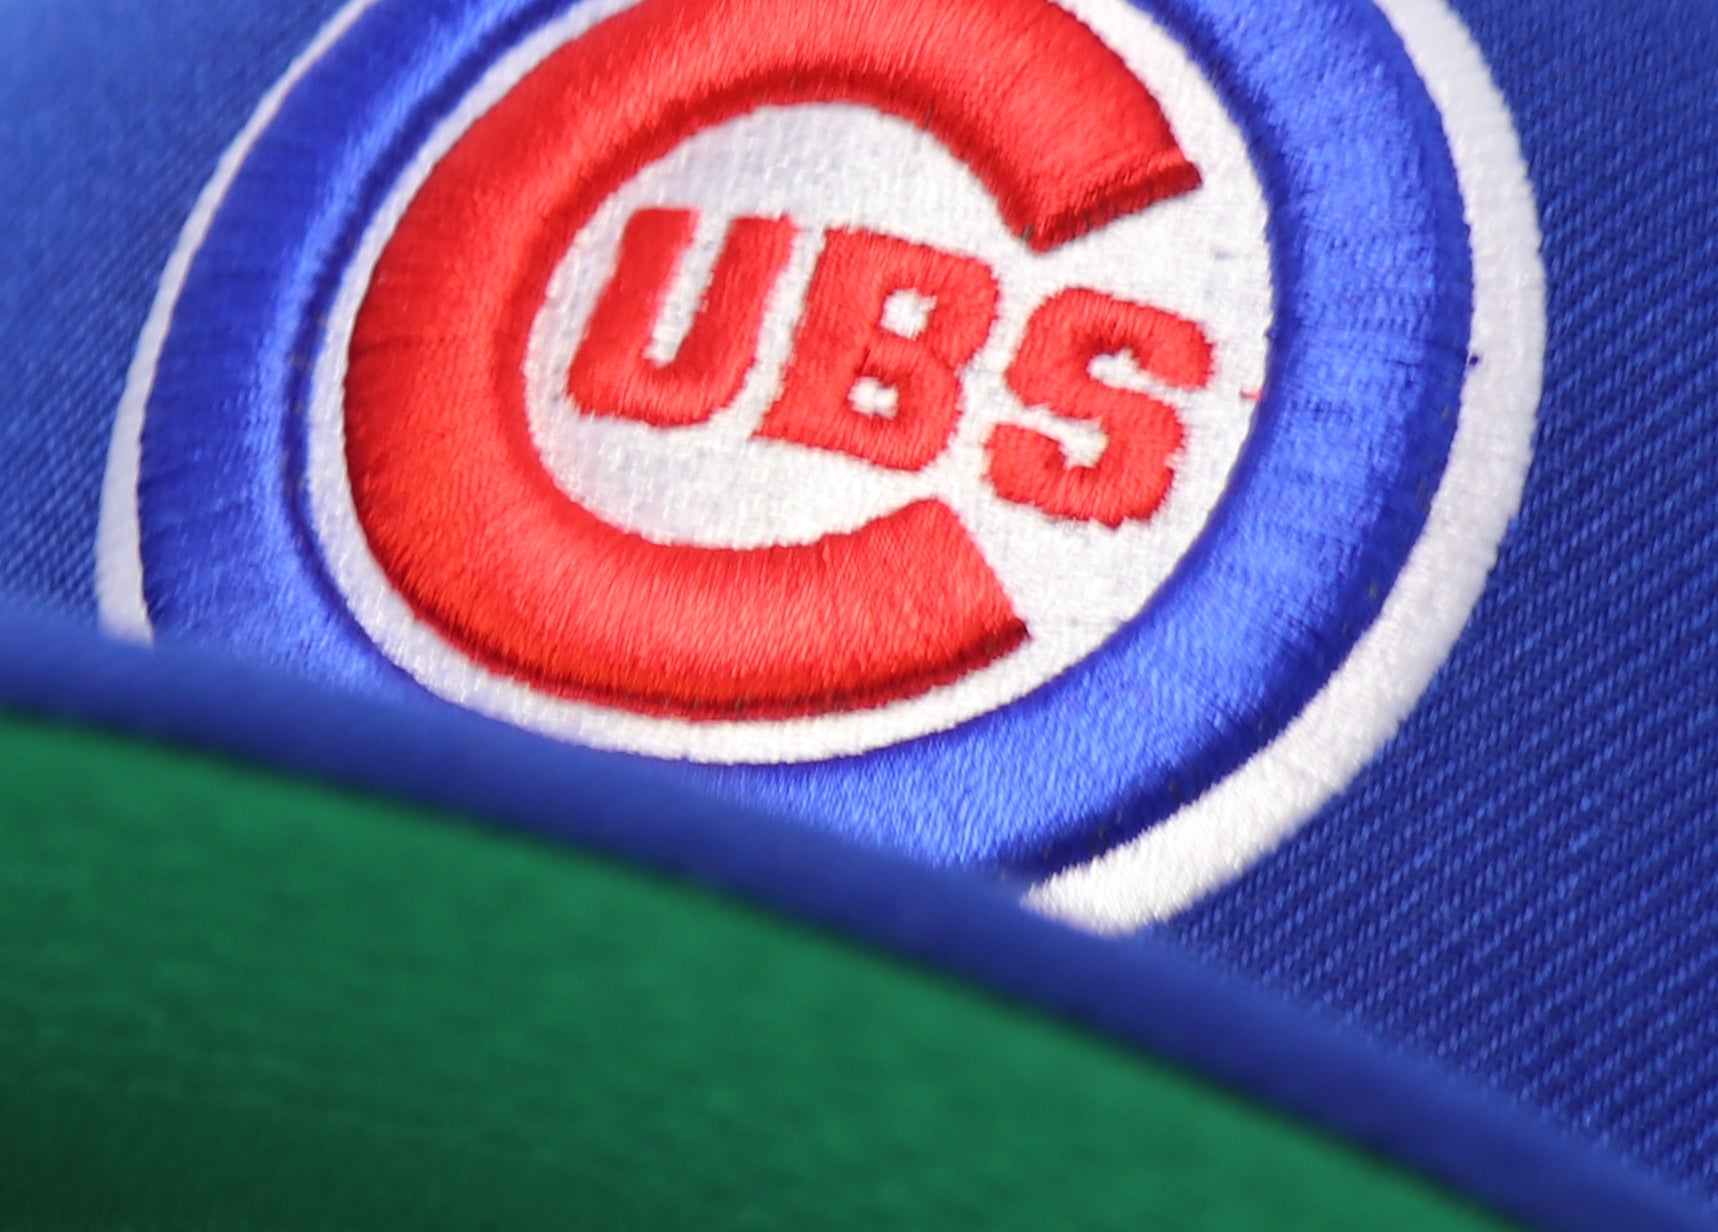 CHICAGO CUBS (ROYAL) "2016 WS X 1990 ASG" CUBS NEW ERA 59FIFTY FITTED (GREEN UNDER VISOR)